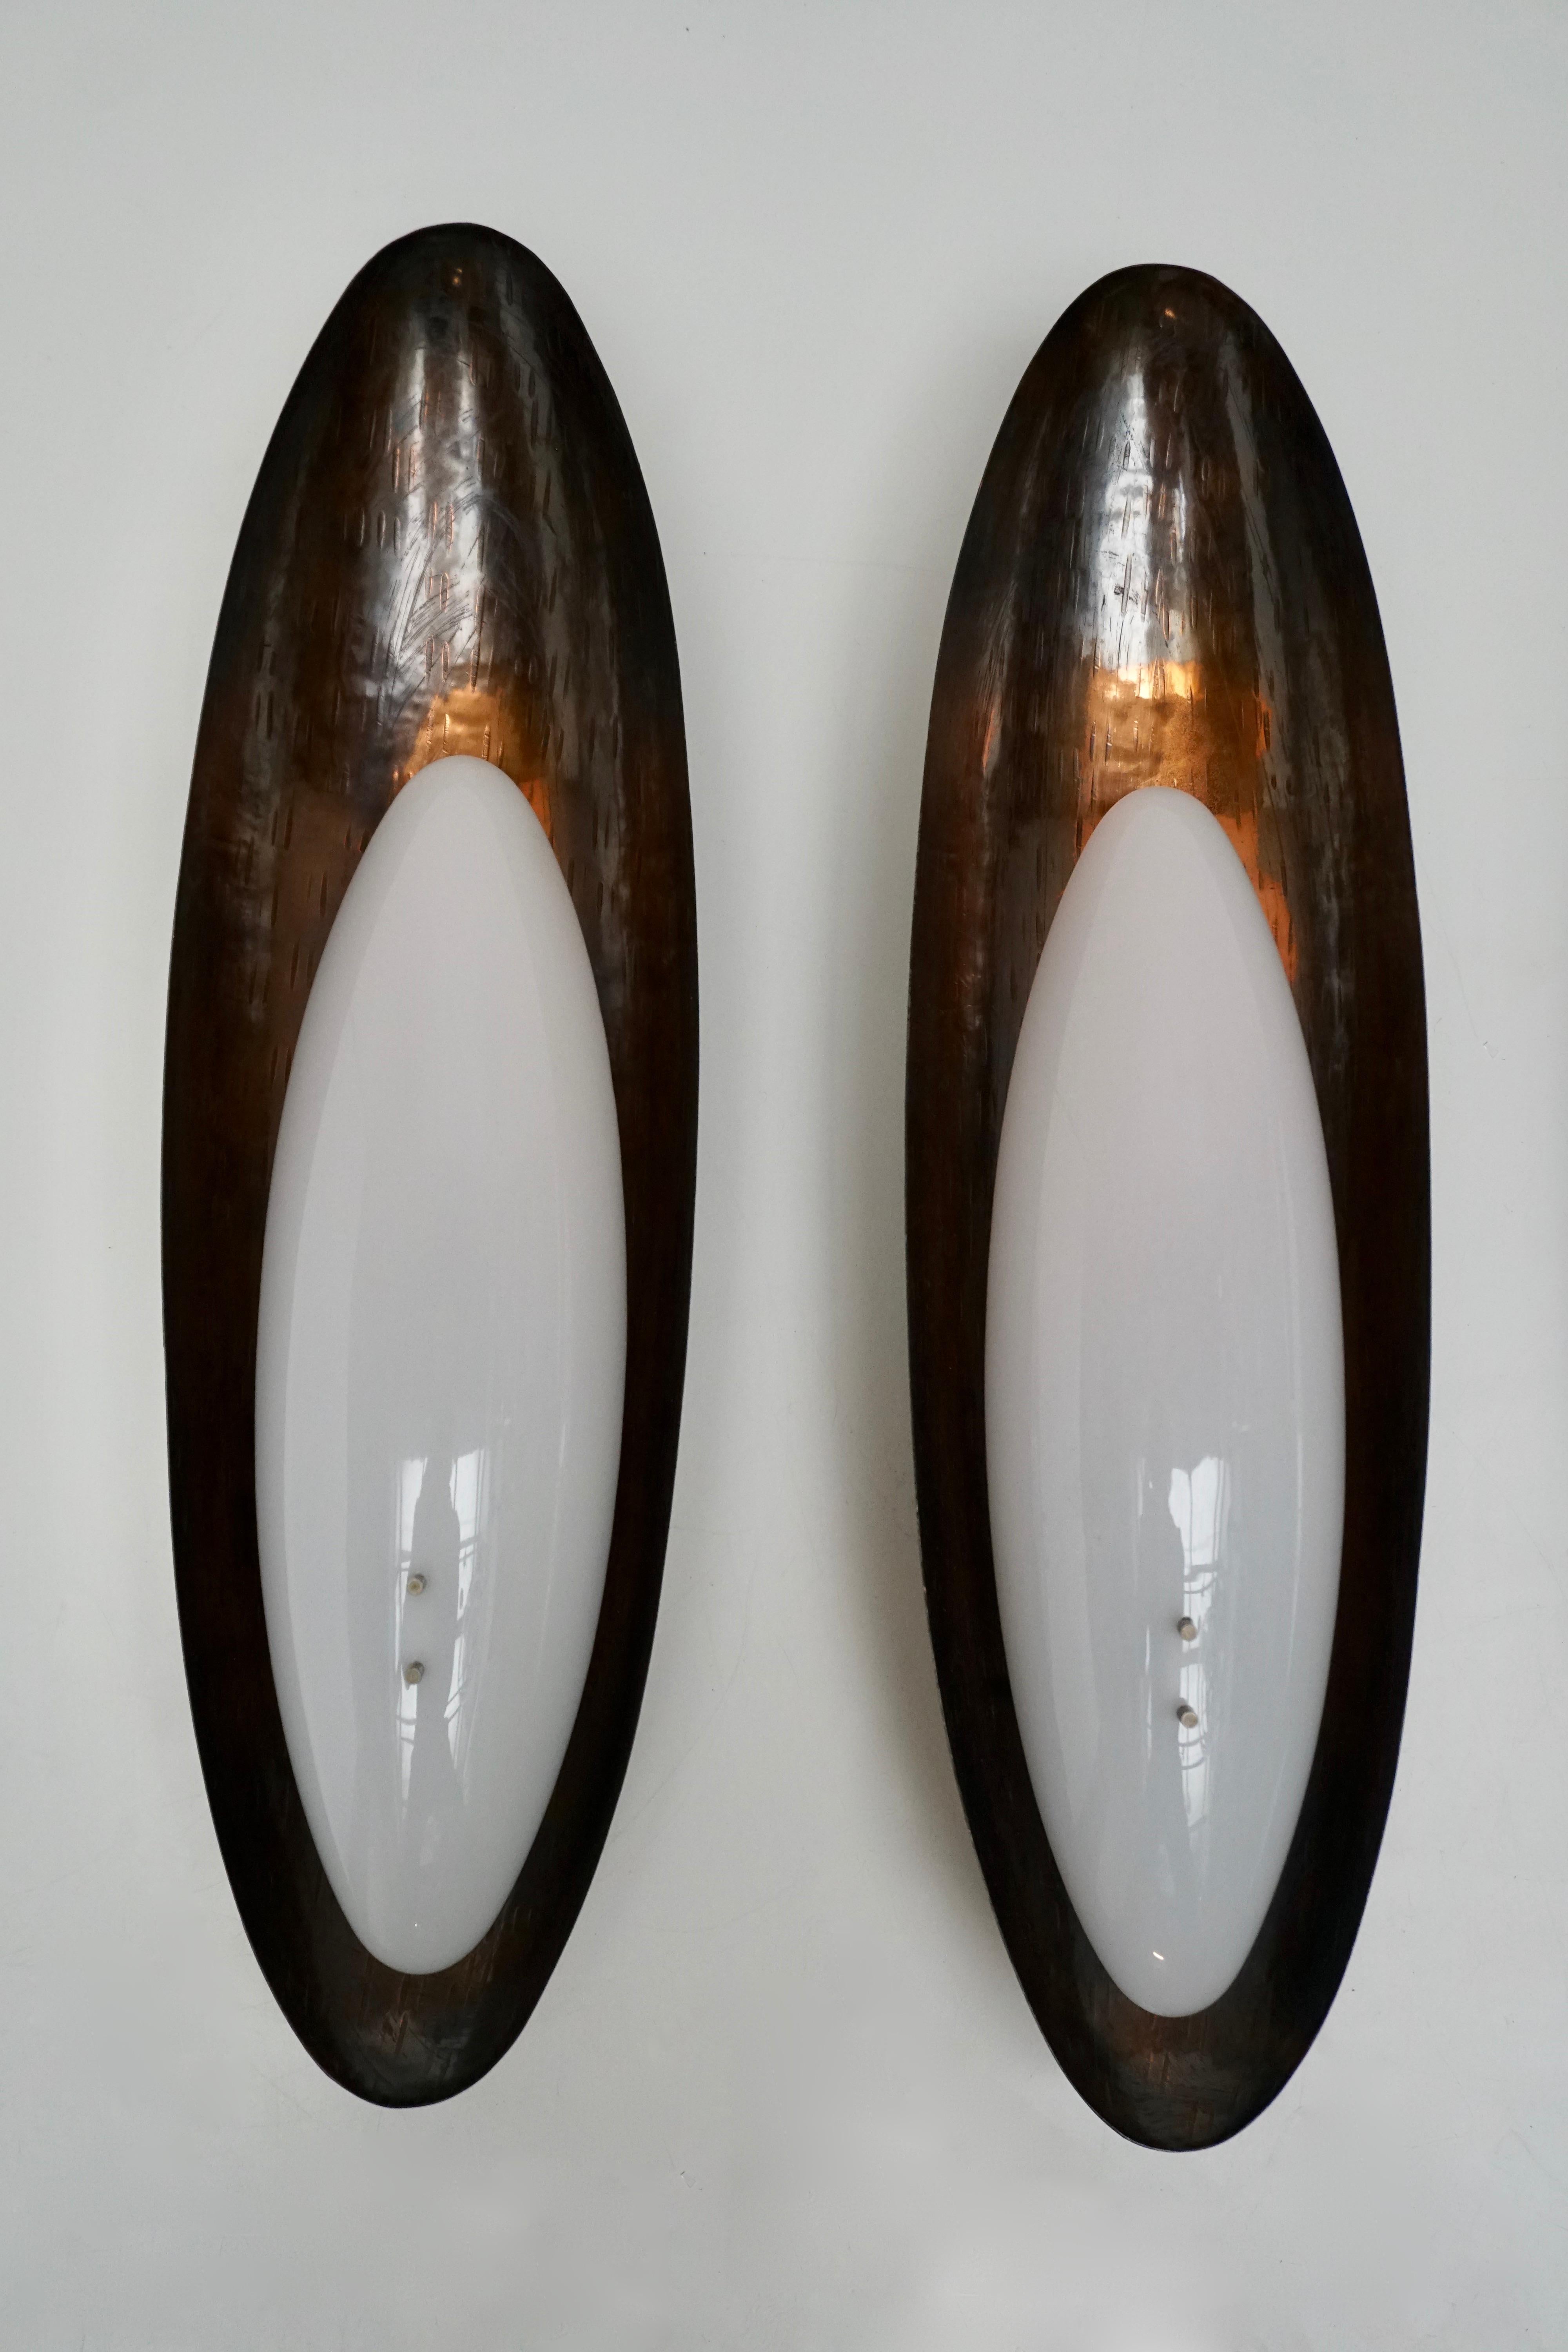 One  sconce by Reggiani. Designed and manufactured in Italy, circa 1960s. Hand-hammered copper and Perspex.
Takes two E27 25w maximum bulbs.

Two pieces are sold.